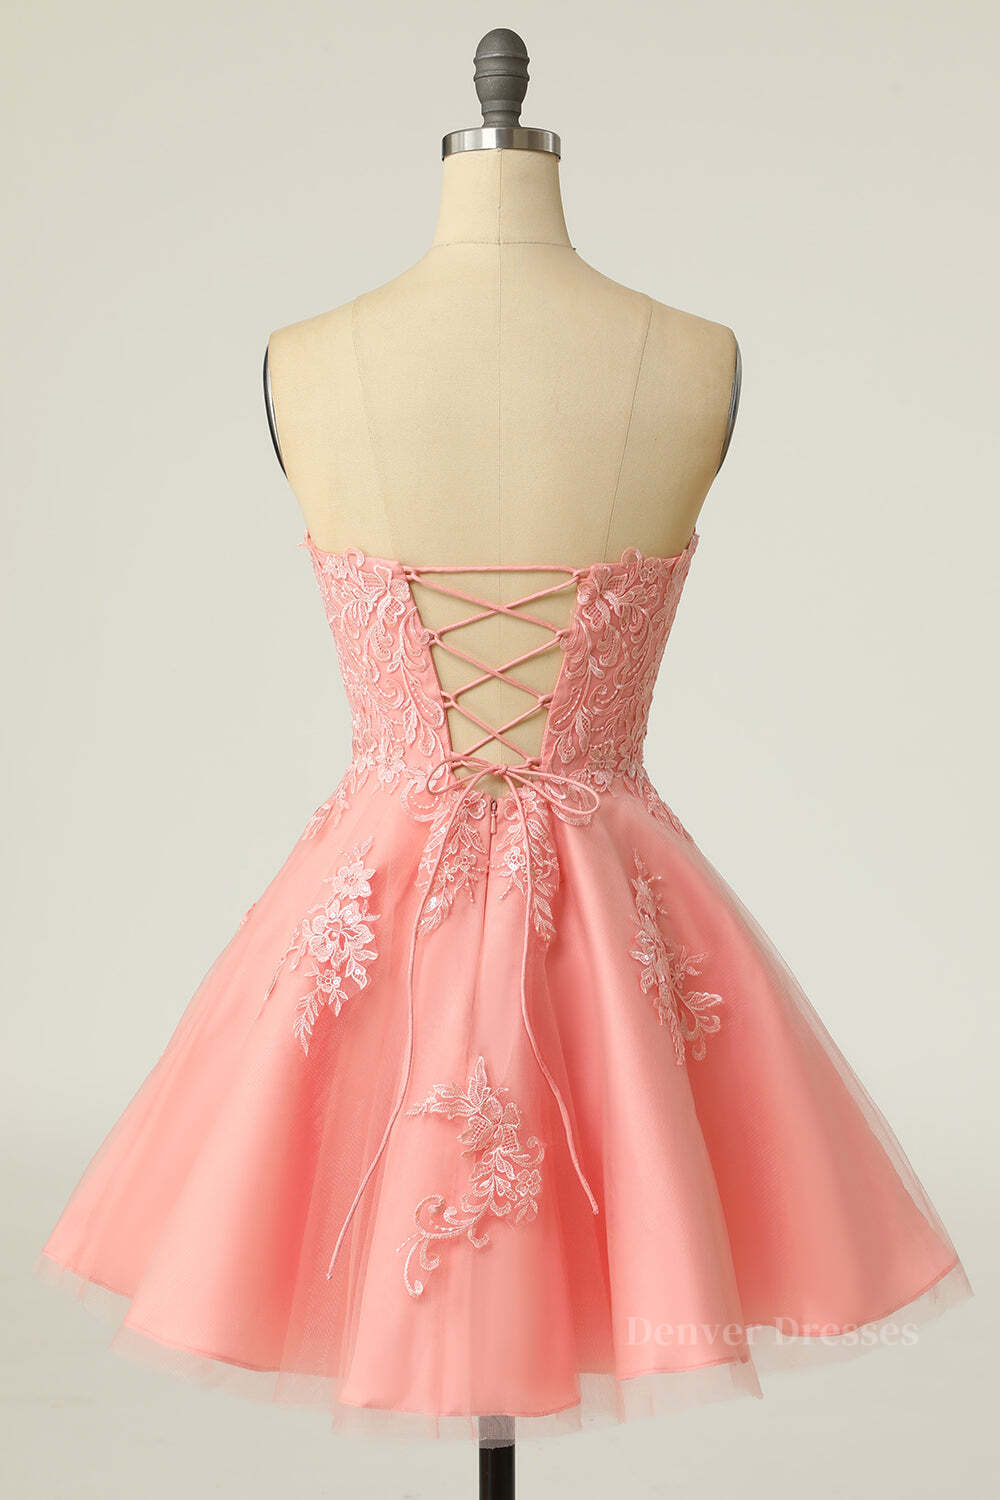 Party Dresses For Teenage Girls, Coral Strapless A-line Appliques Short Prom Dress